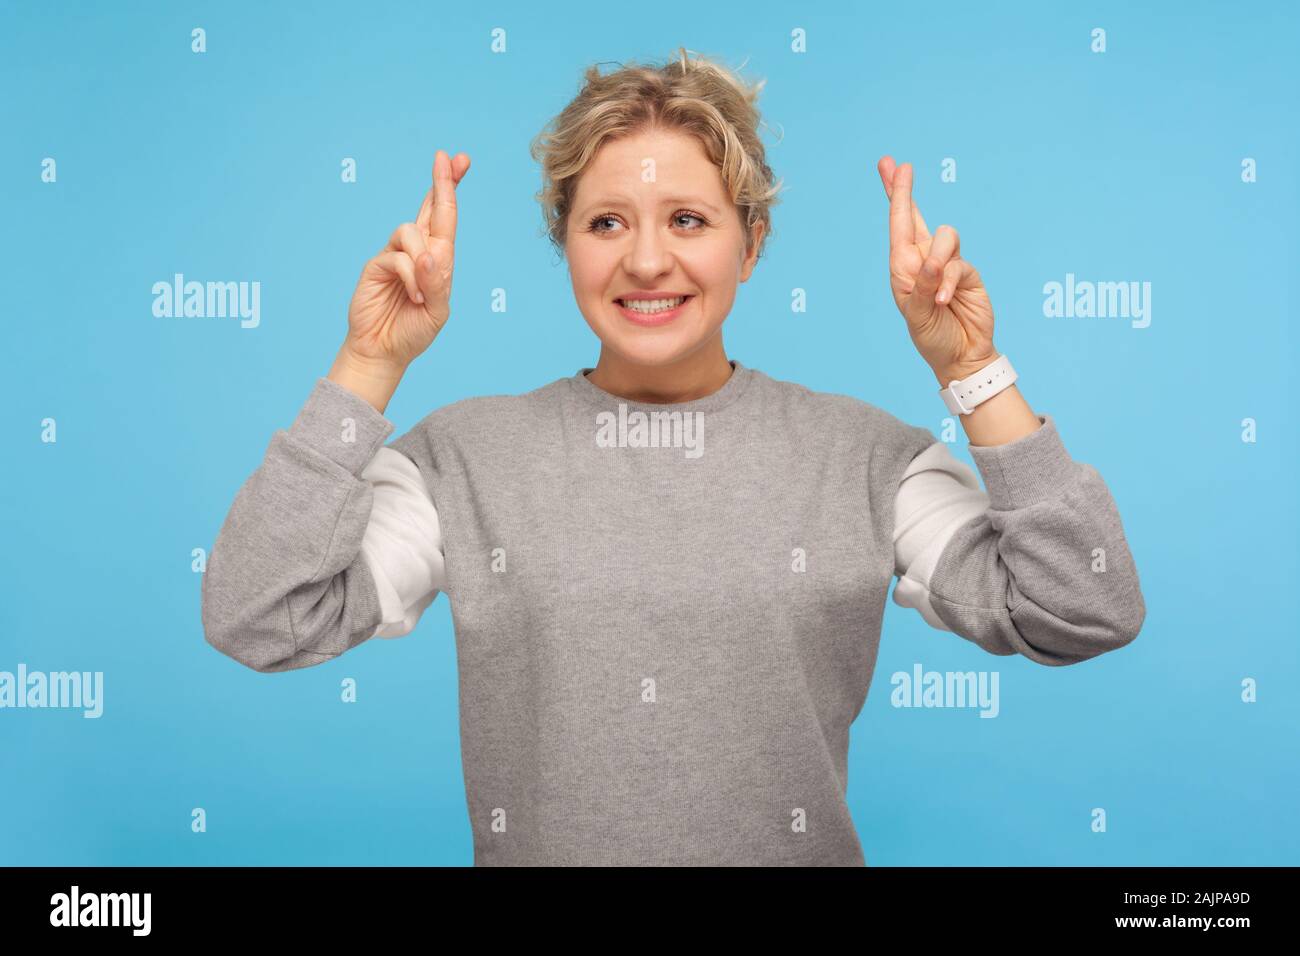 Need fortune. Positive woman with short hair in sweatshirt holding crossed fingers and wishing for good luck, having excited look, hoping for victory. Stock Photo